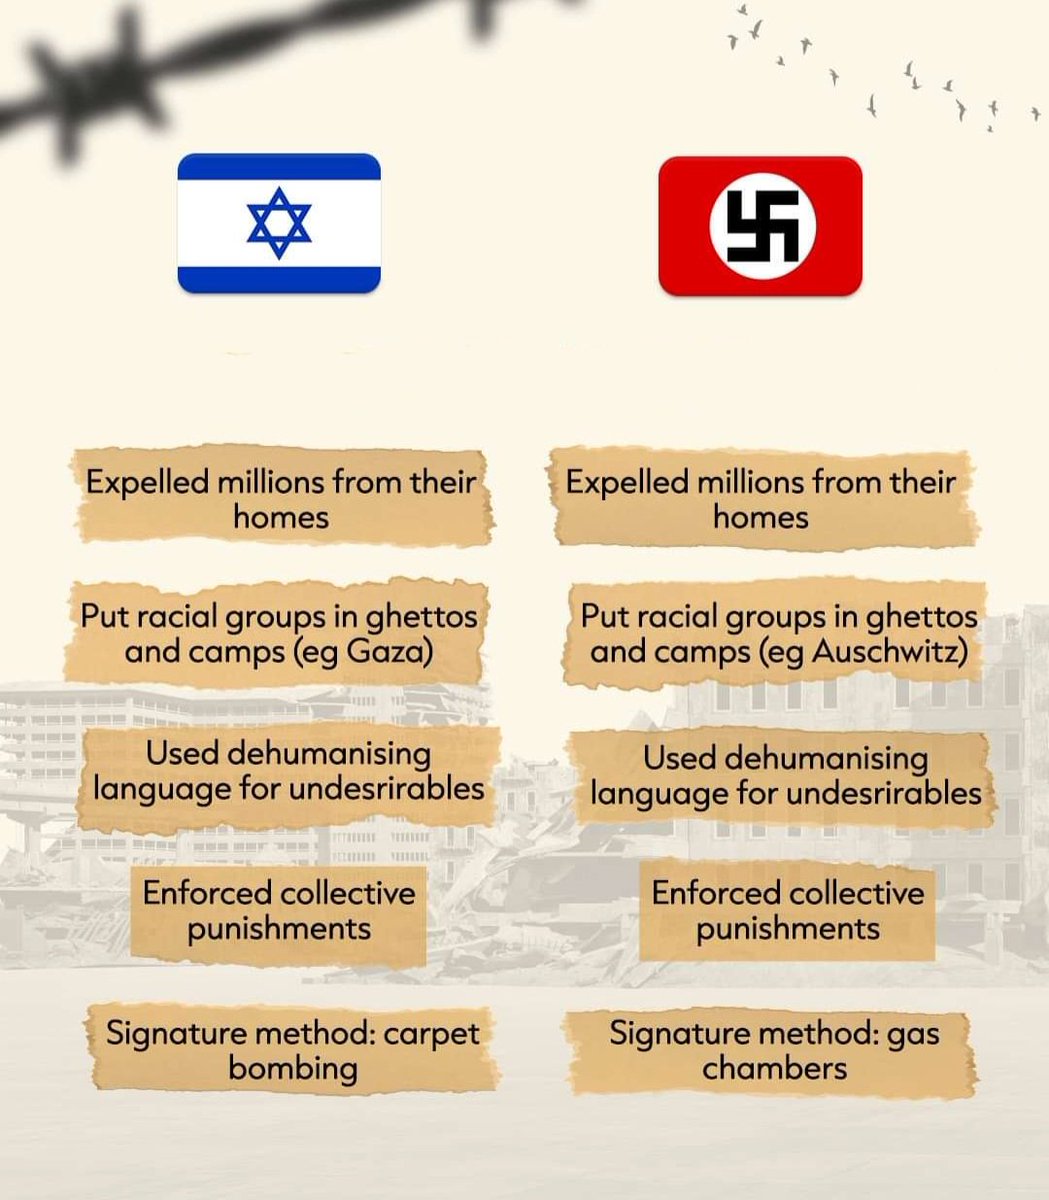 Wonder why they want to make it illegal to compare Zionism with Nazism... Just asking, it is for a friend.